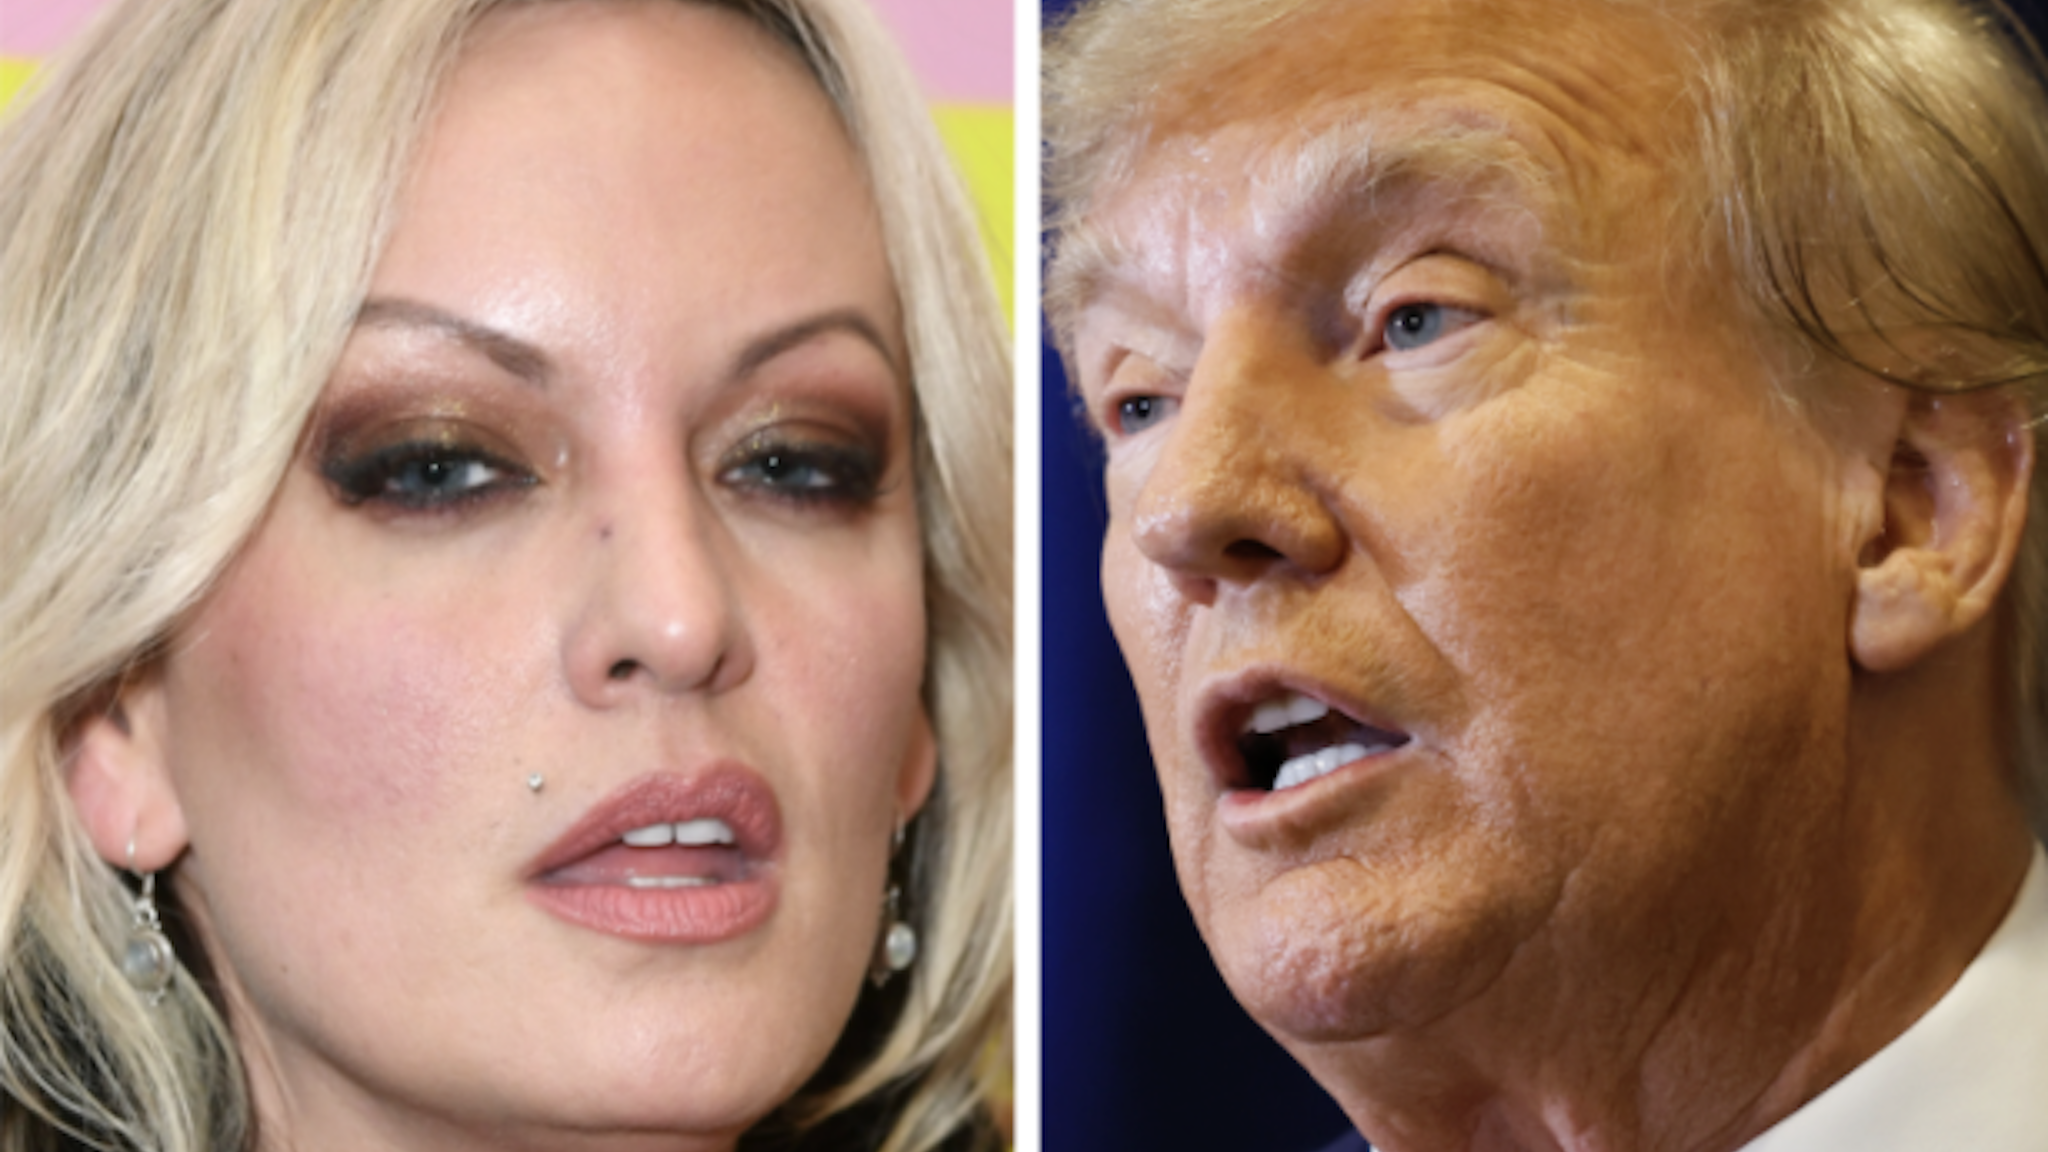 The case brought against him by the Manhattan district attorney’s office is not about whether or not Trump cheated on his wife with porn actress Stormy Daniels, and its far more tenuous than his detractors would like to believe.